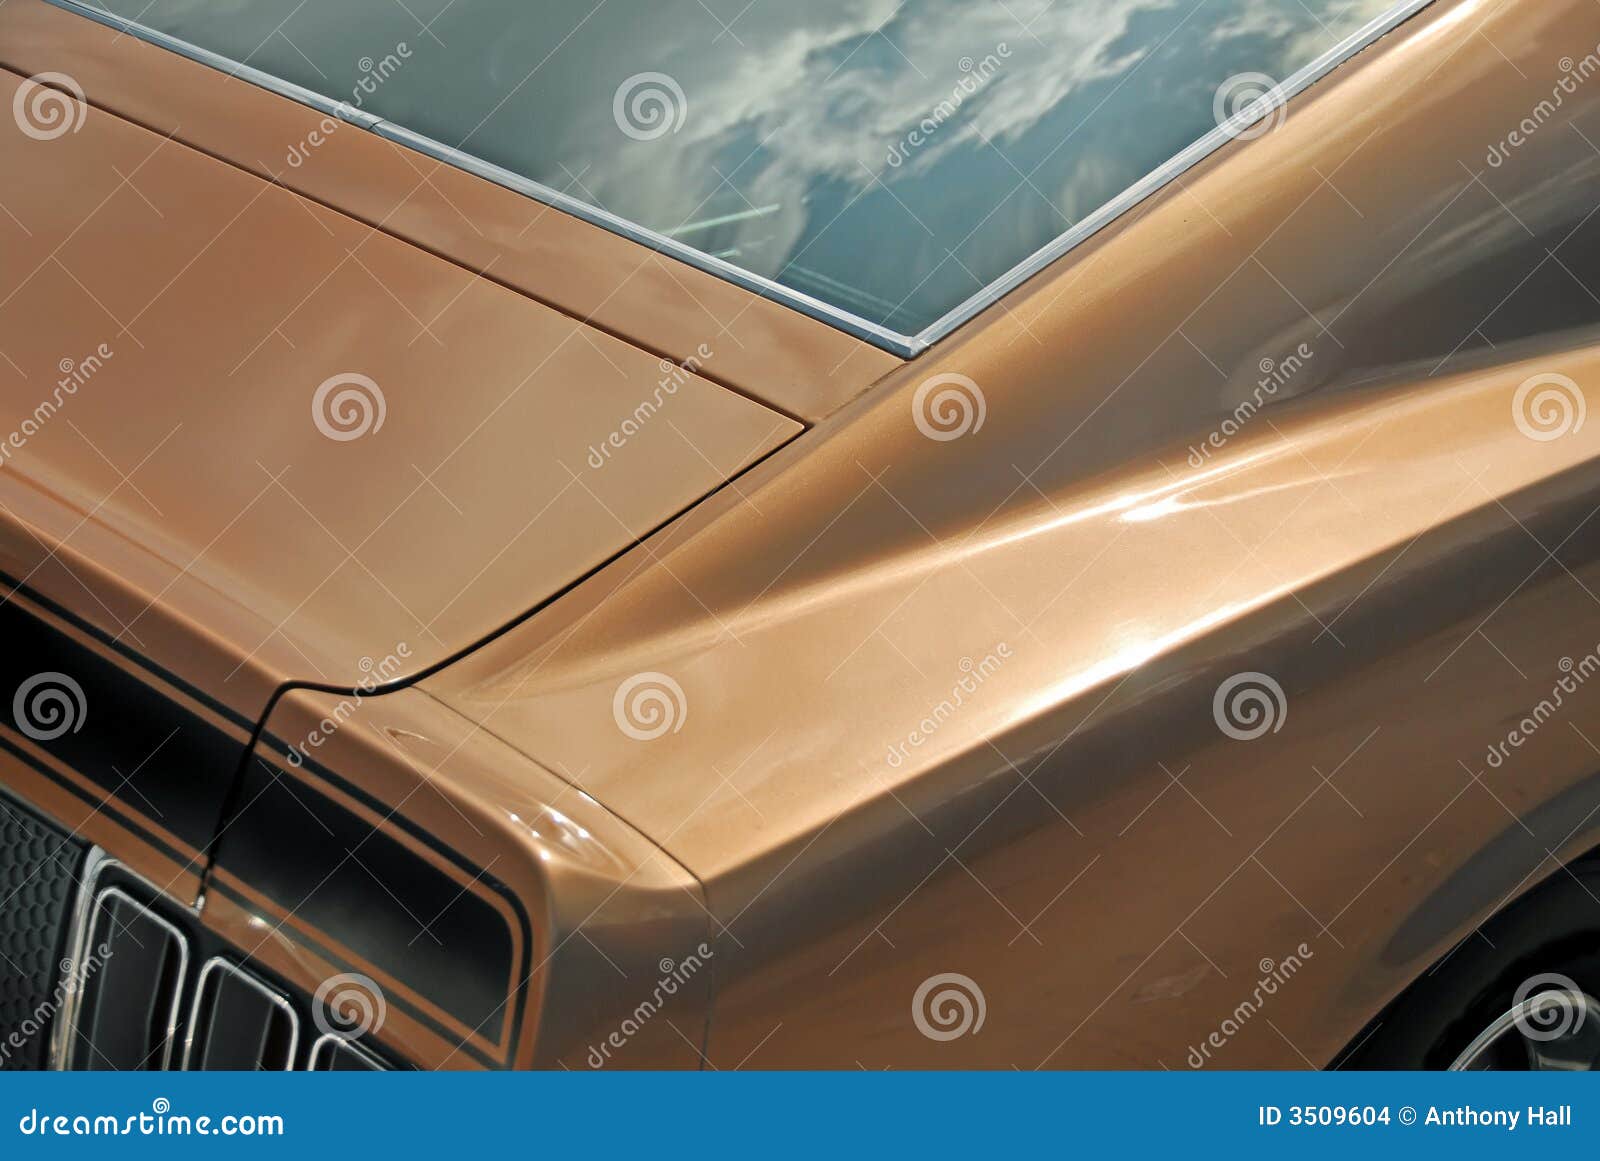 Bronze Muscle Car Detail stock photo. Image of window - 3509604